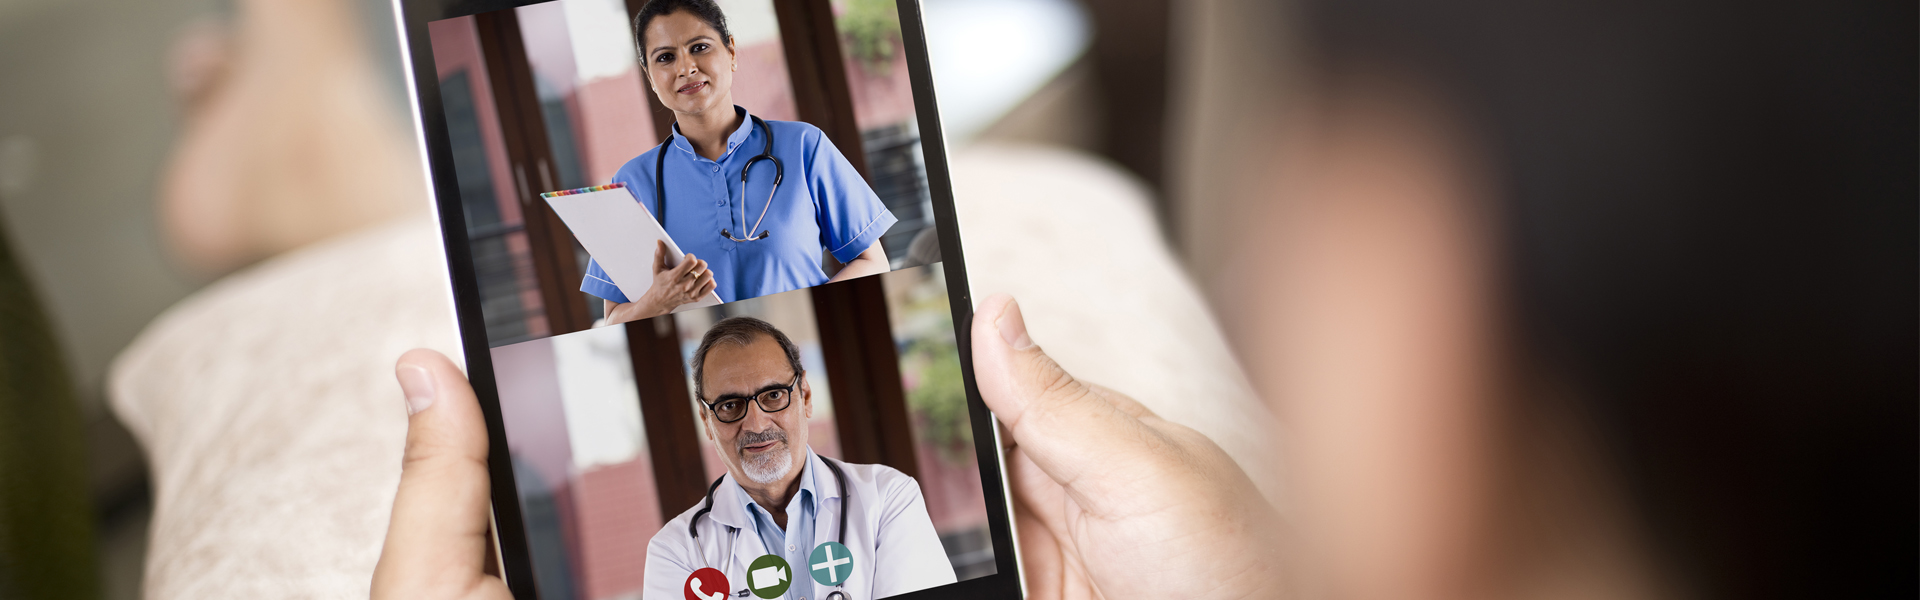 accessing telehealth on smartphone